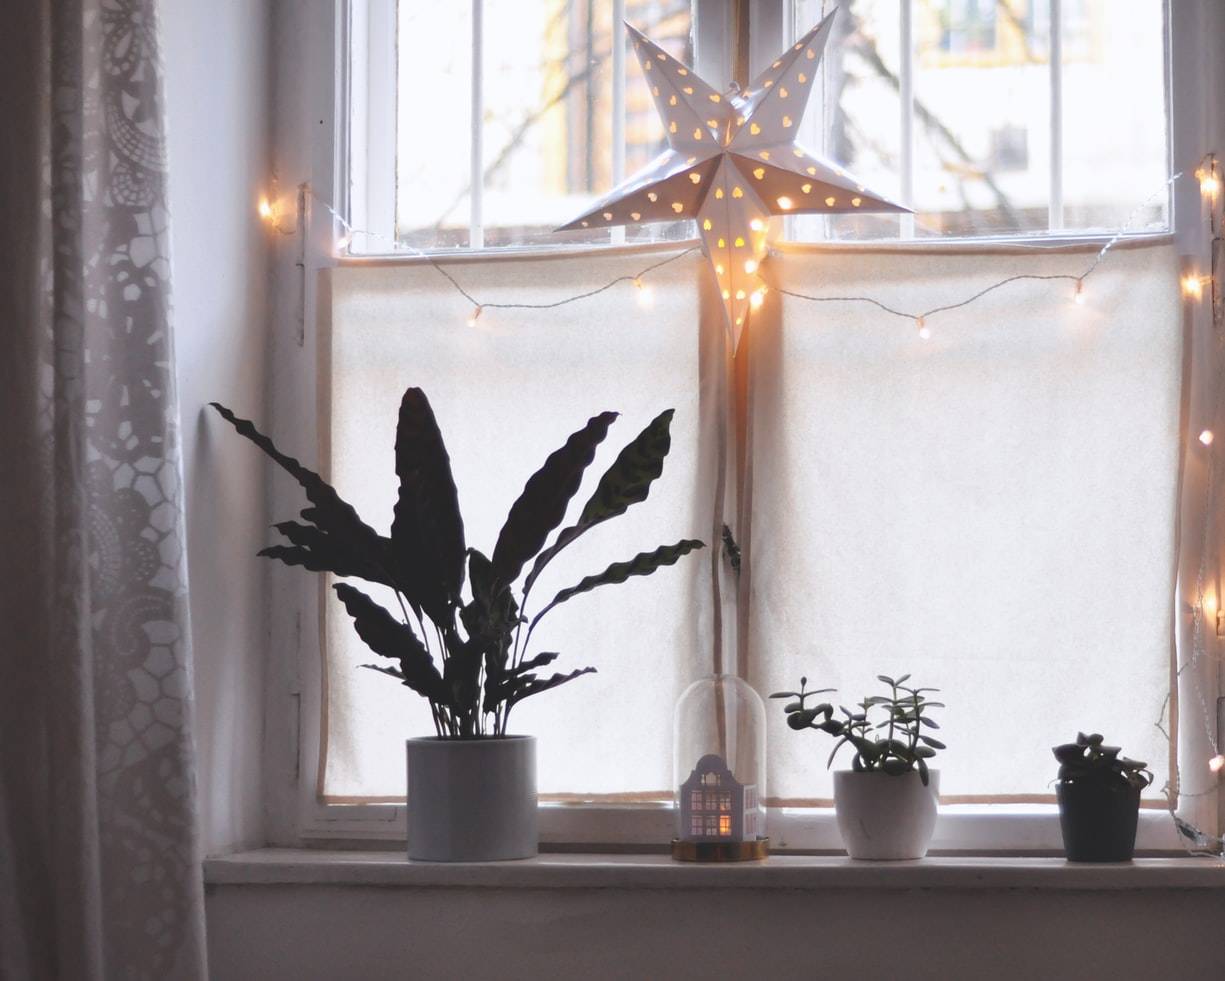 Hygge decor styling guide (10 tips to inspire your Danish design)